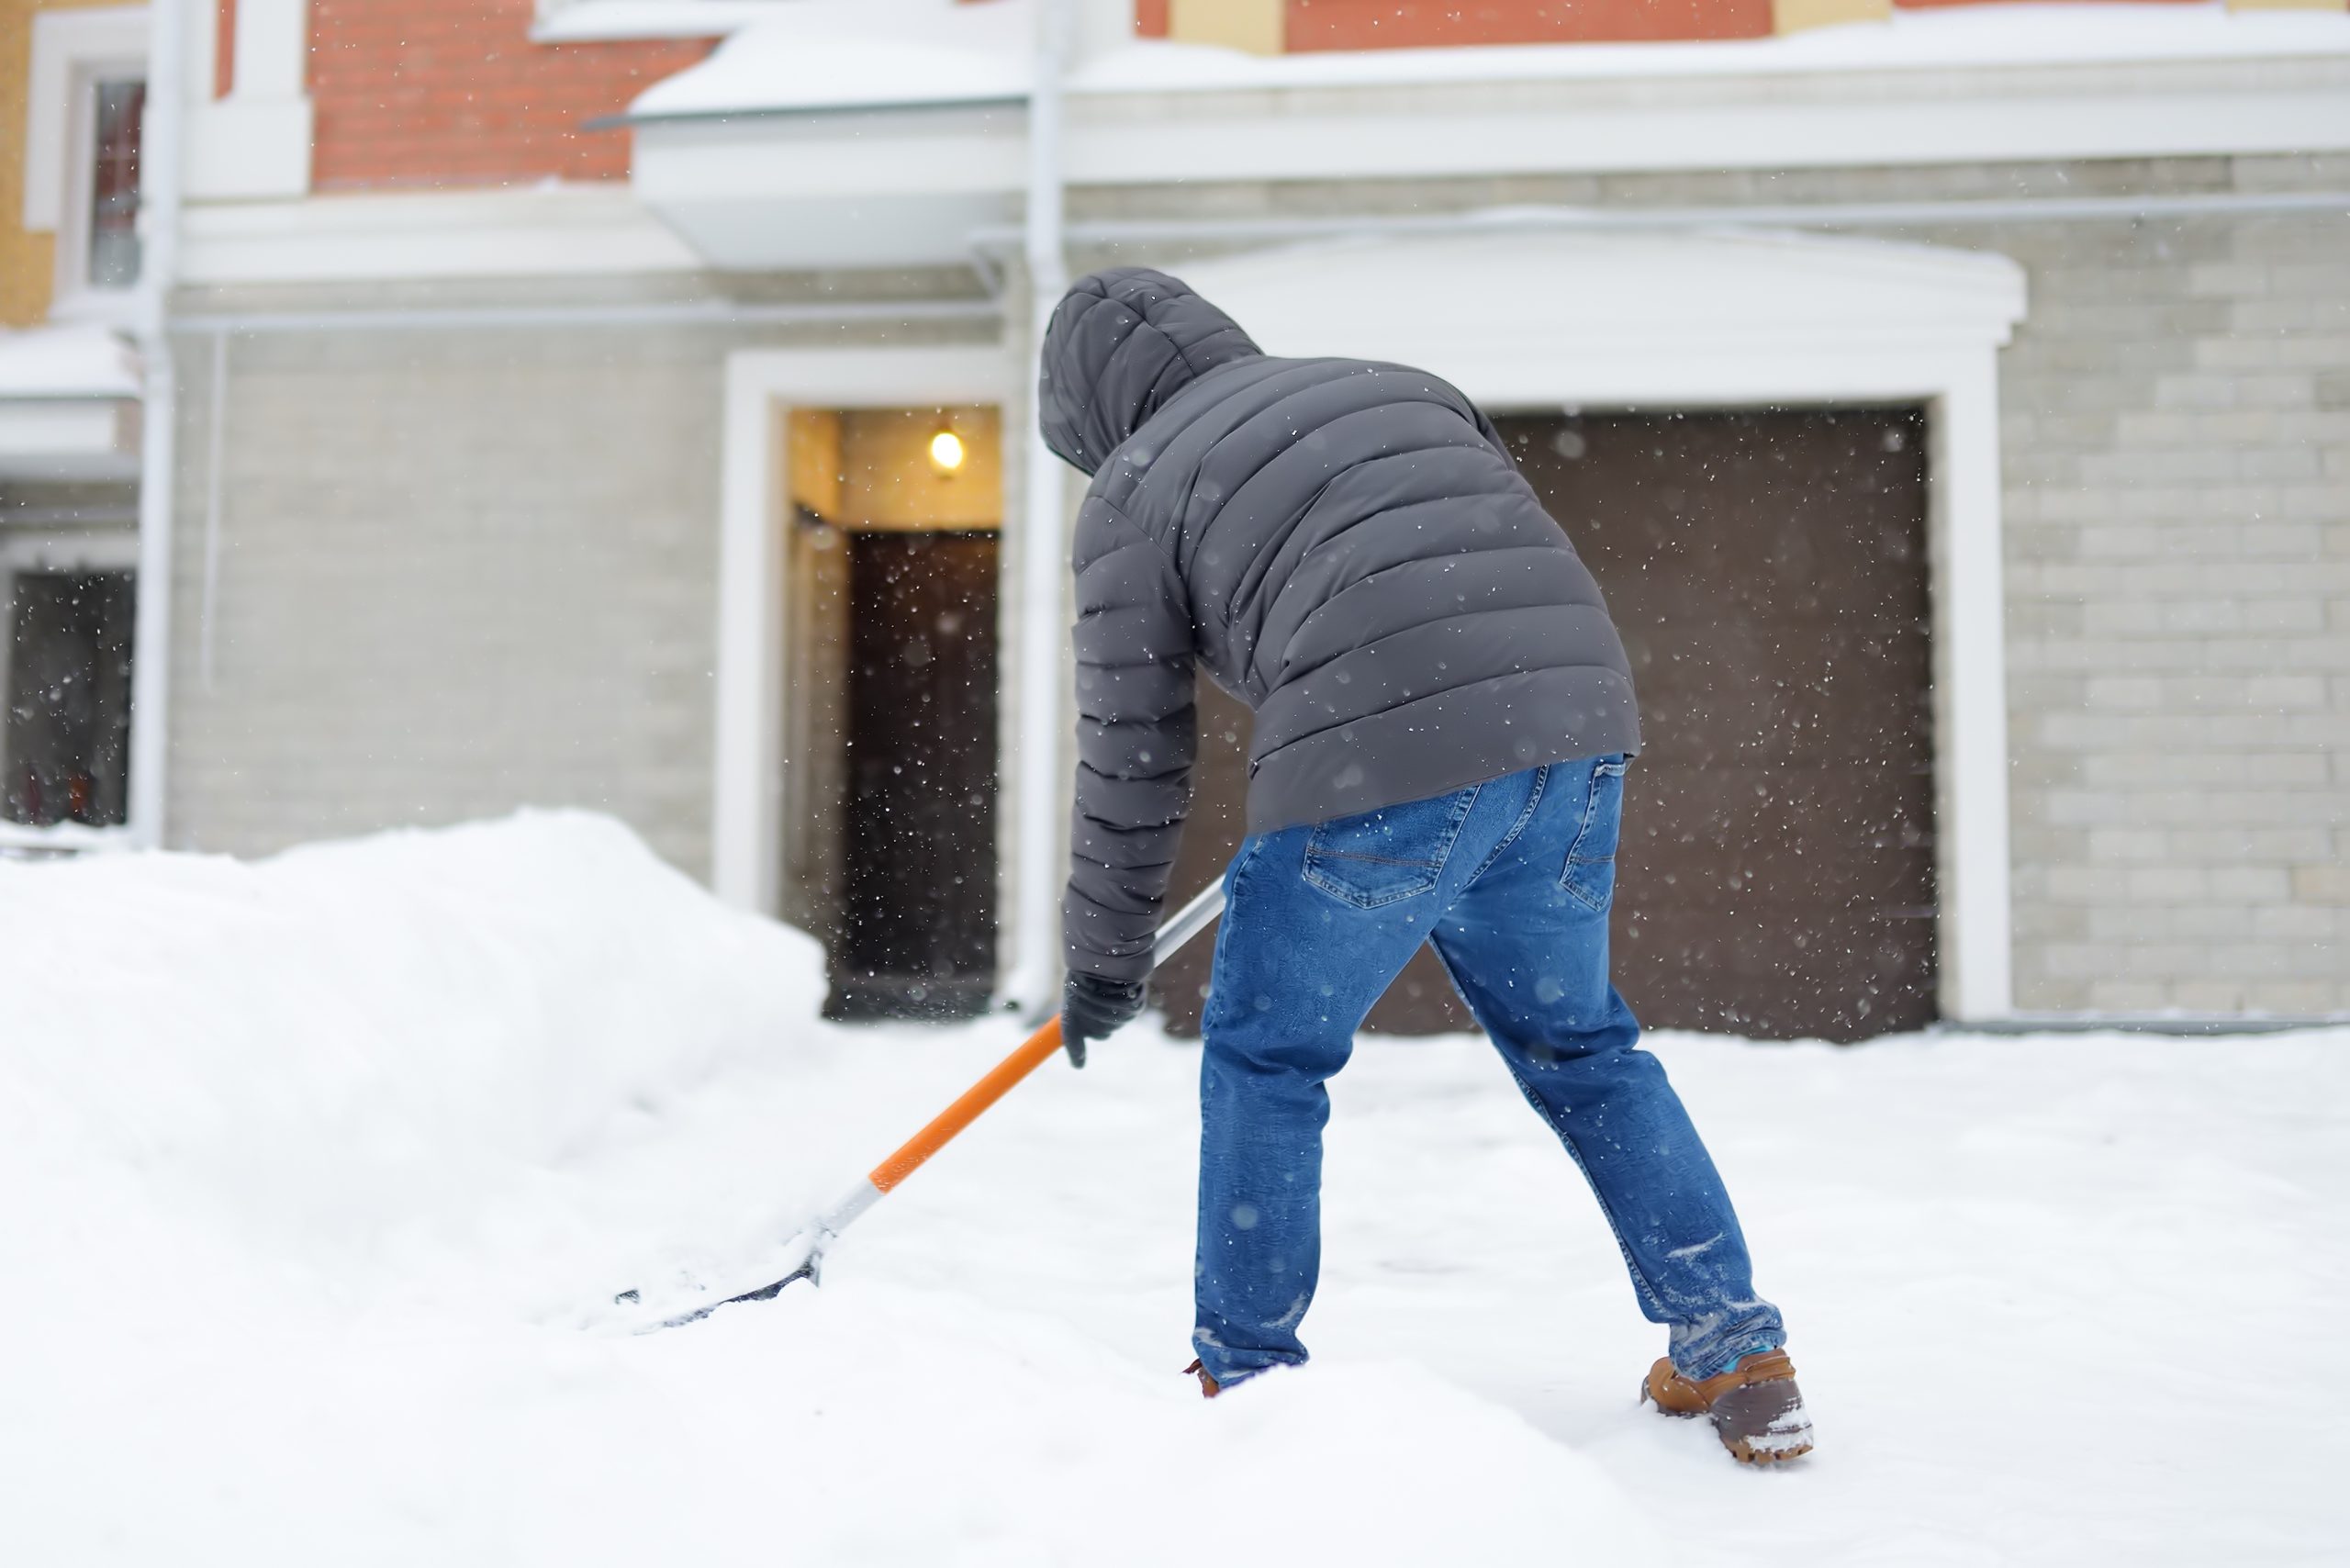 Winterproof Your Driveway: How To Care For Your Asphalt Paving During The Harsh Weather